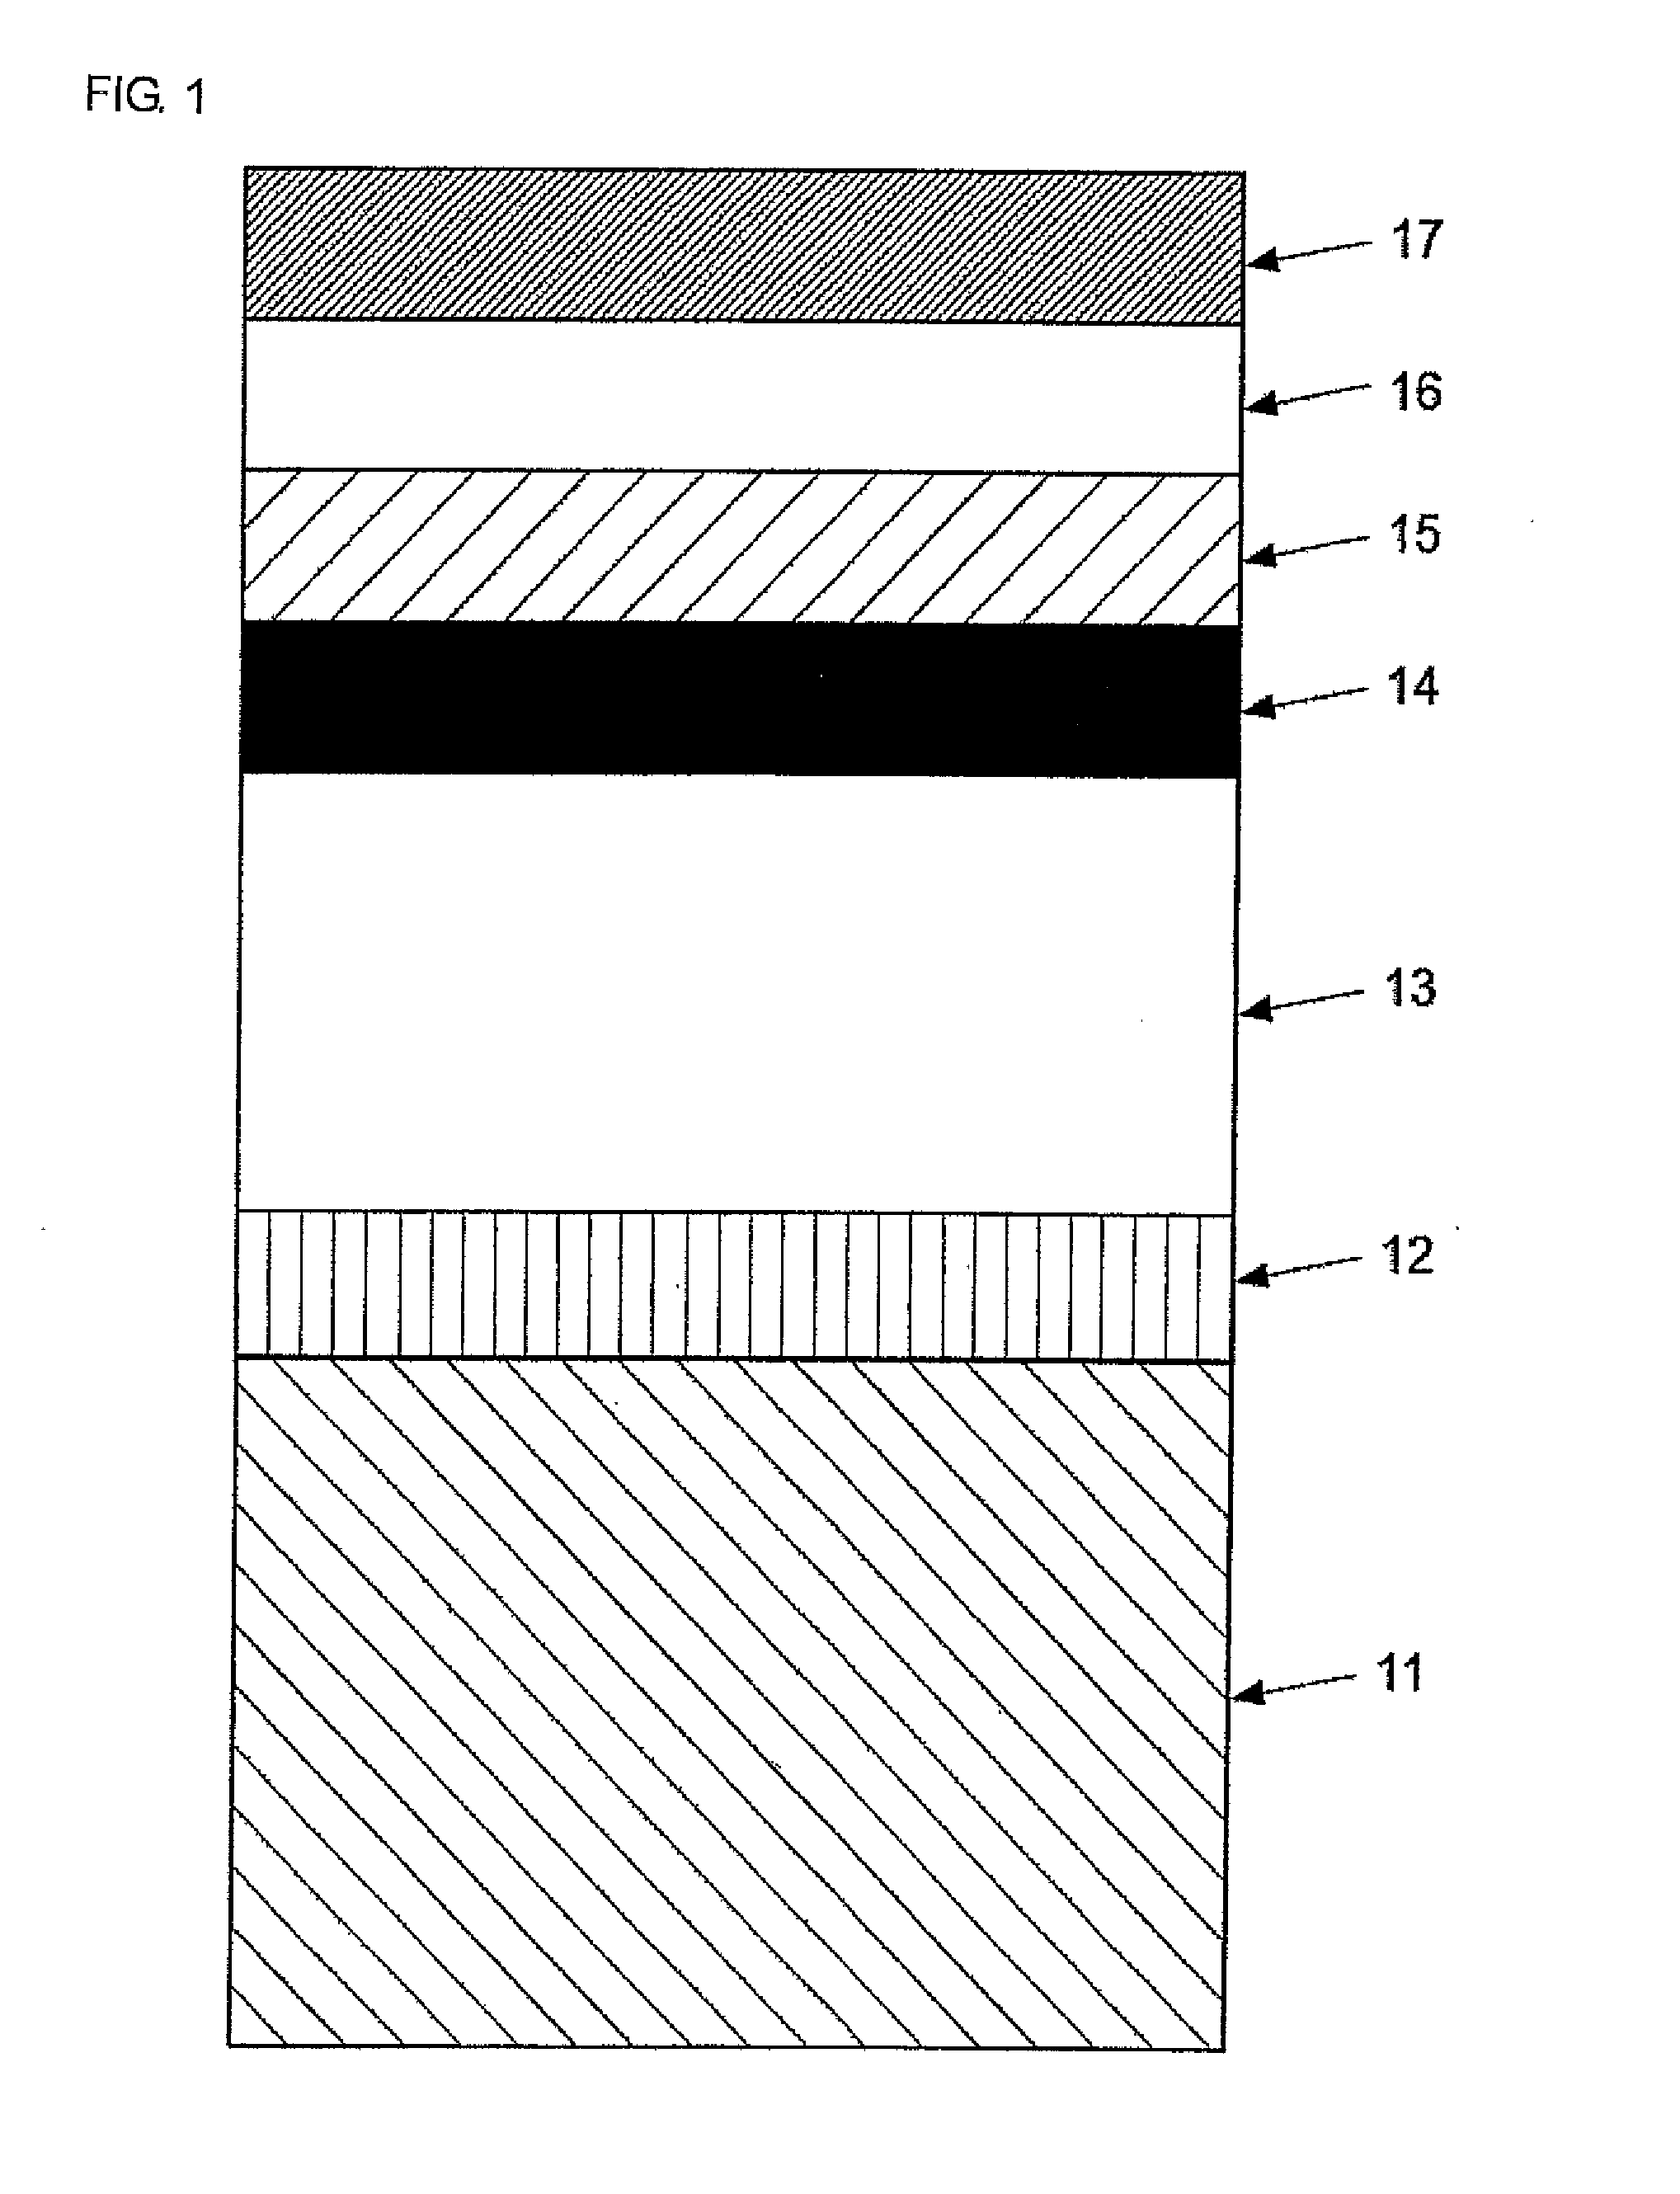 Current-perpendicular-to-plane magneto-resistance effect element